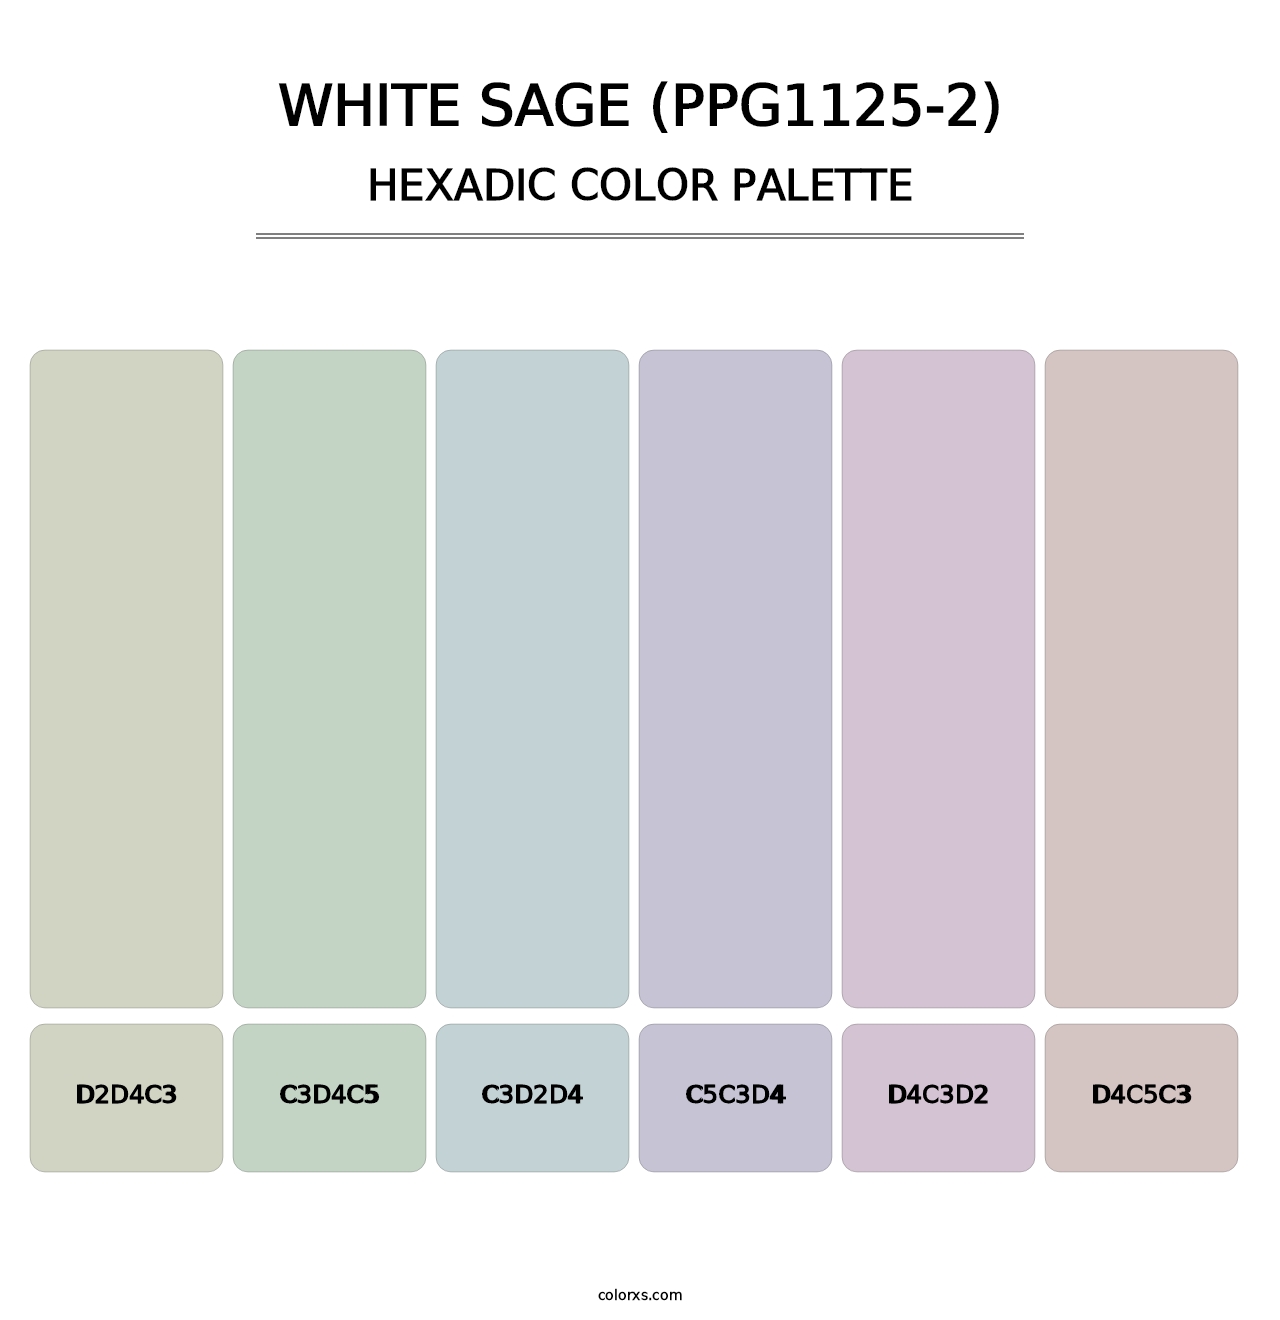 White Sage (PPG1125-2) - Hexadic Color Palette